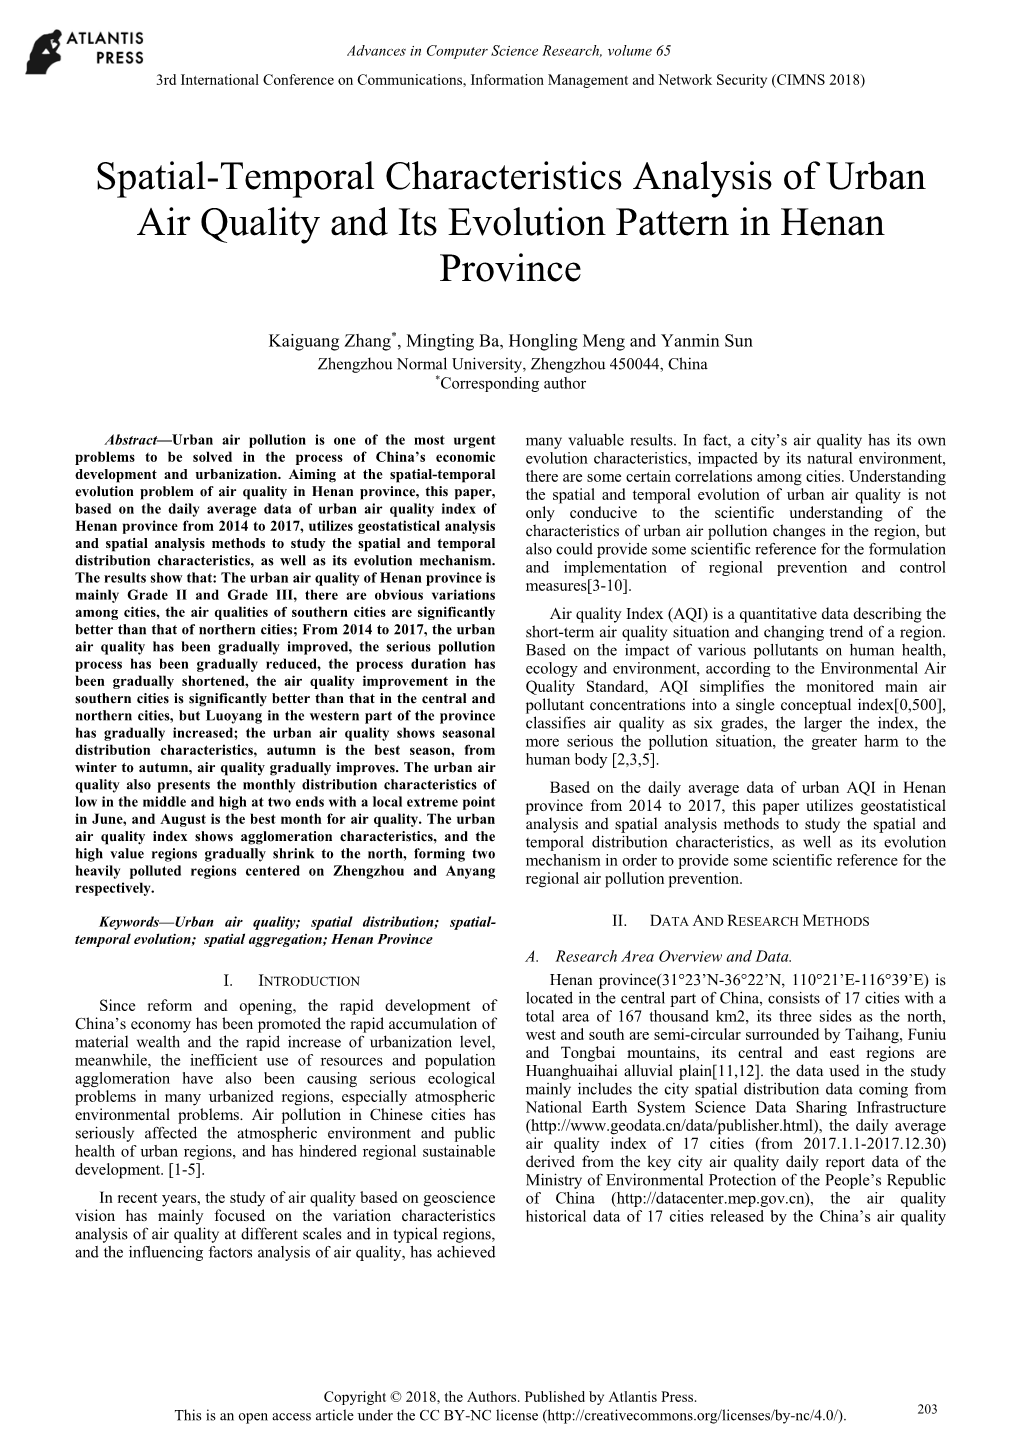 Spatial-Temporal Characteristics Analysis of Urban Air Quality and Its Evolution Pattern in Henan Province